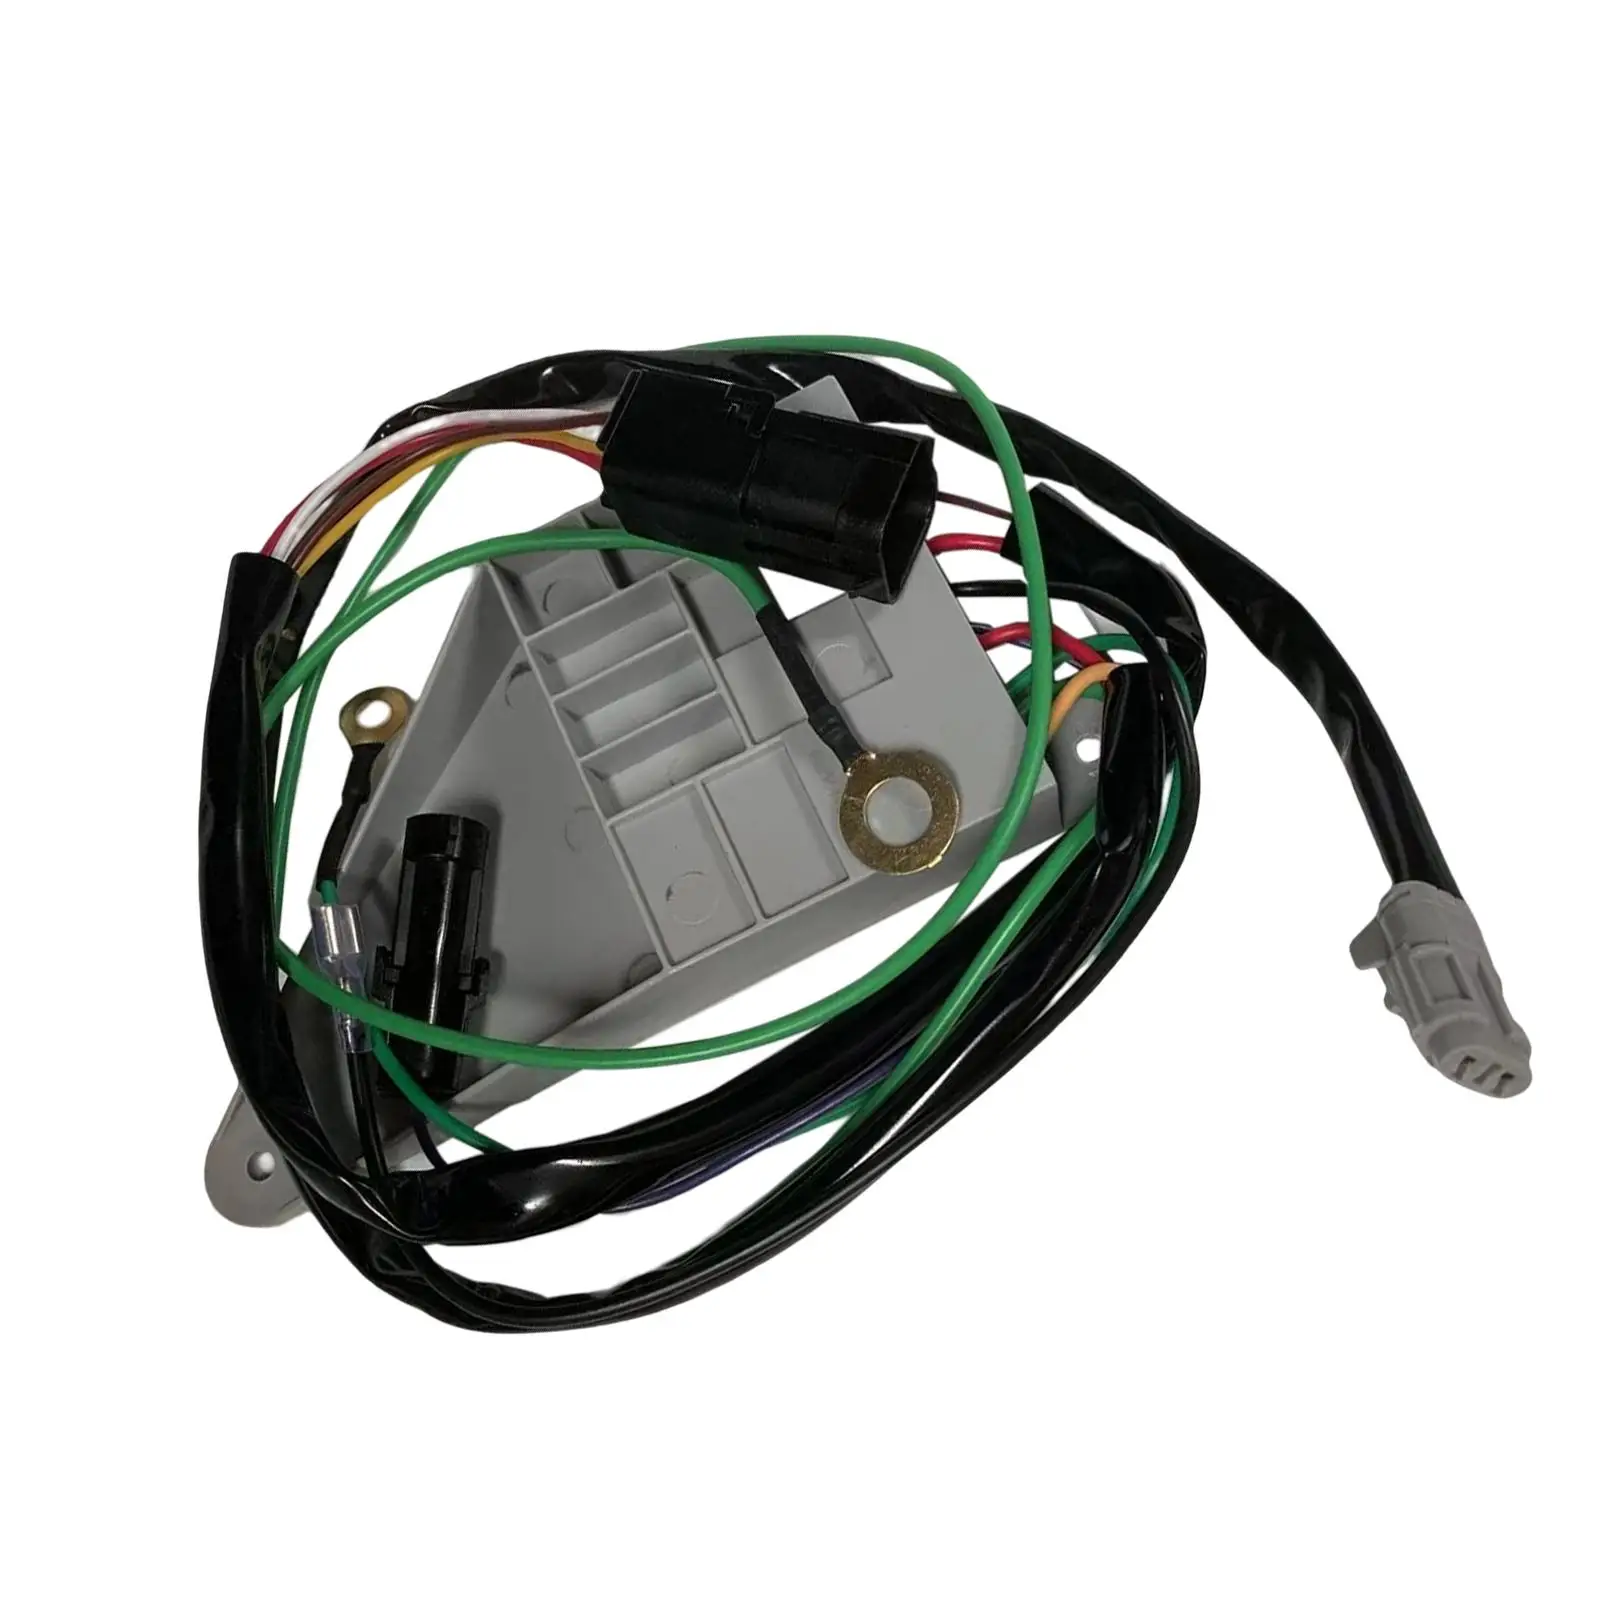 Control Unit Assembly Kit Components for Recreational Vehicles